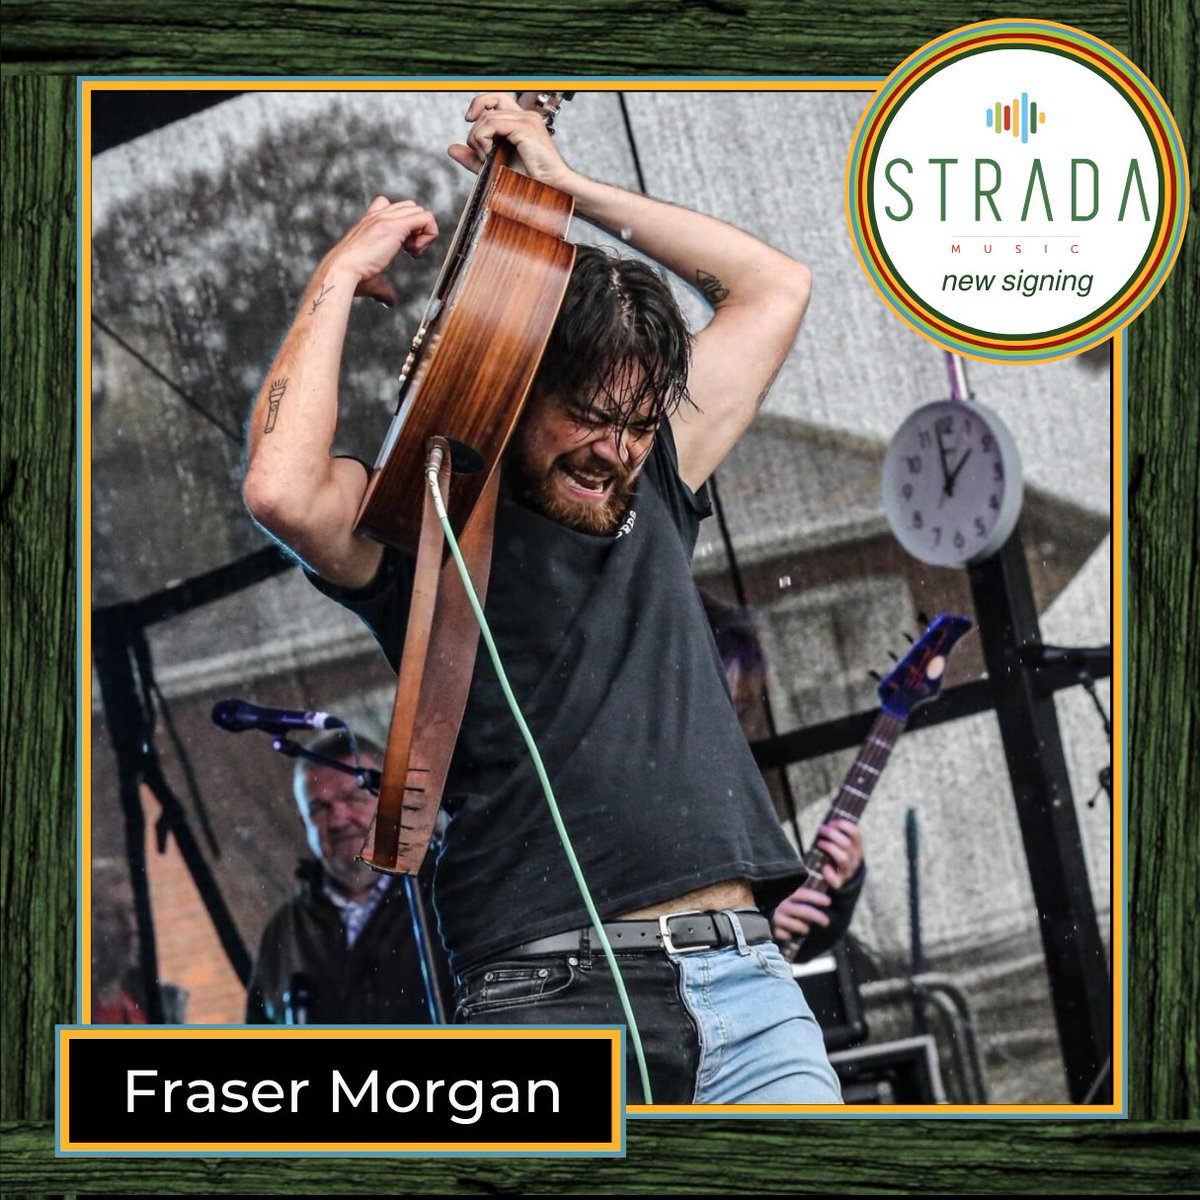 📣NEW SIGNING @FraserMorganUK 🎊 We are very proud to welcome Fraser Morgan to our roster, working with agent Cameron Pettit and can’t wait to get their show on the road🚐. Read Read More | Bookings ↙ stradamusic.com/artist/fraser-… #frasermorgan #acousticpunk